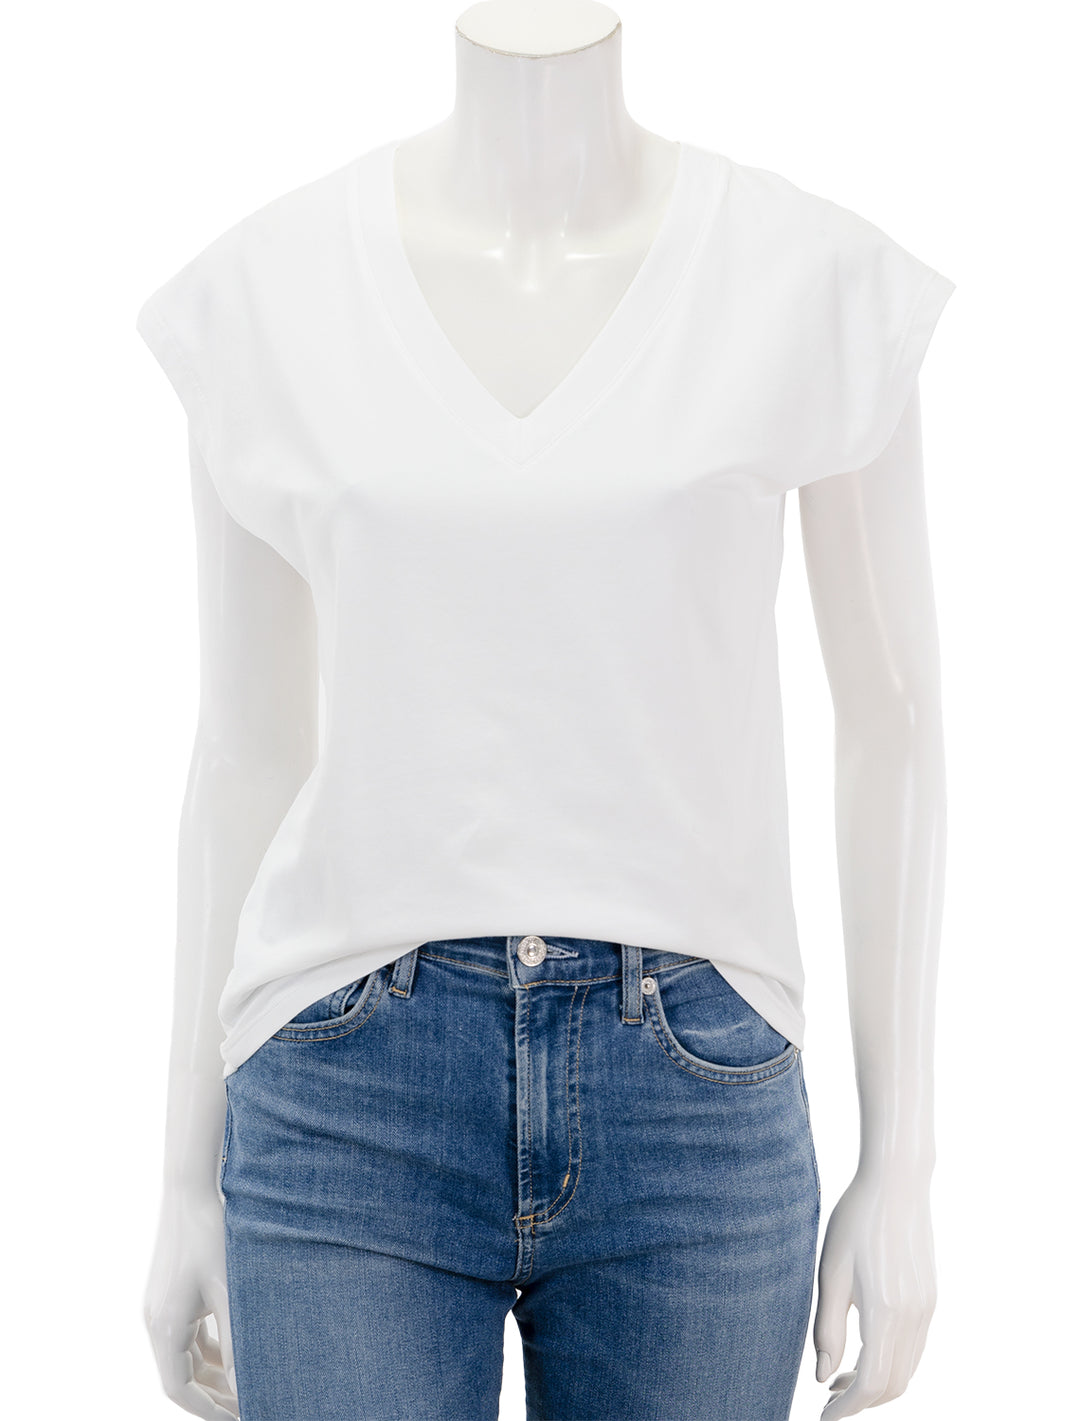 Front view of Patrick Assaraf's iconic vneck dolman tee in white.